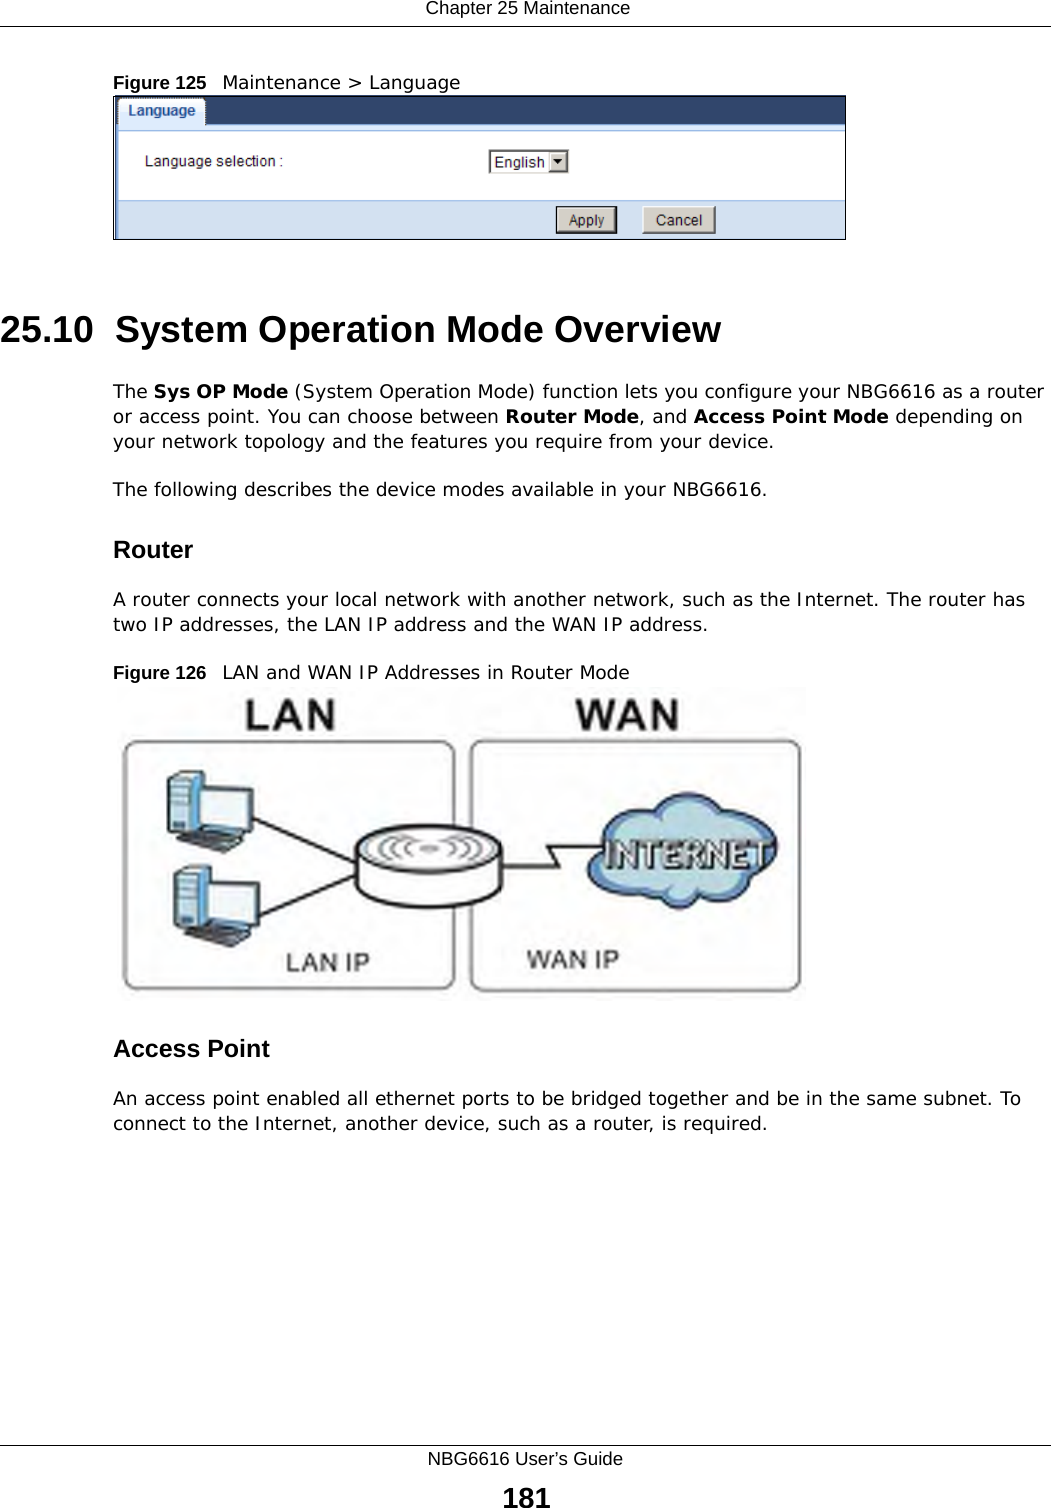  Chapter 25 MaintenanceNBG6616 User’s Guide181Figure 125   Maintenance &gt; Language 25.10  System Operation Mode OverviewThe Sys OP Mode (System Operation Mode) function lets you configure your NBG6616 as a router or access point. You can choose between Router Mode, and Access Point Mode depending on your network topology and the features you require from your device. The following describes the device modes available in your NBG6616.RouterA router connects your local network with another network, such as the Internet. The router has two IP addresses, the LAN IP address and the WAN IP address.Figure 126   LAN and WAN IP Addresses in Router ModeAccess PointAn access point enabled all ethernet ports to be bridged together and be in the same subnet. To connect to the Internet, another device, such as a router, is required.